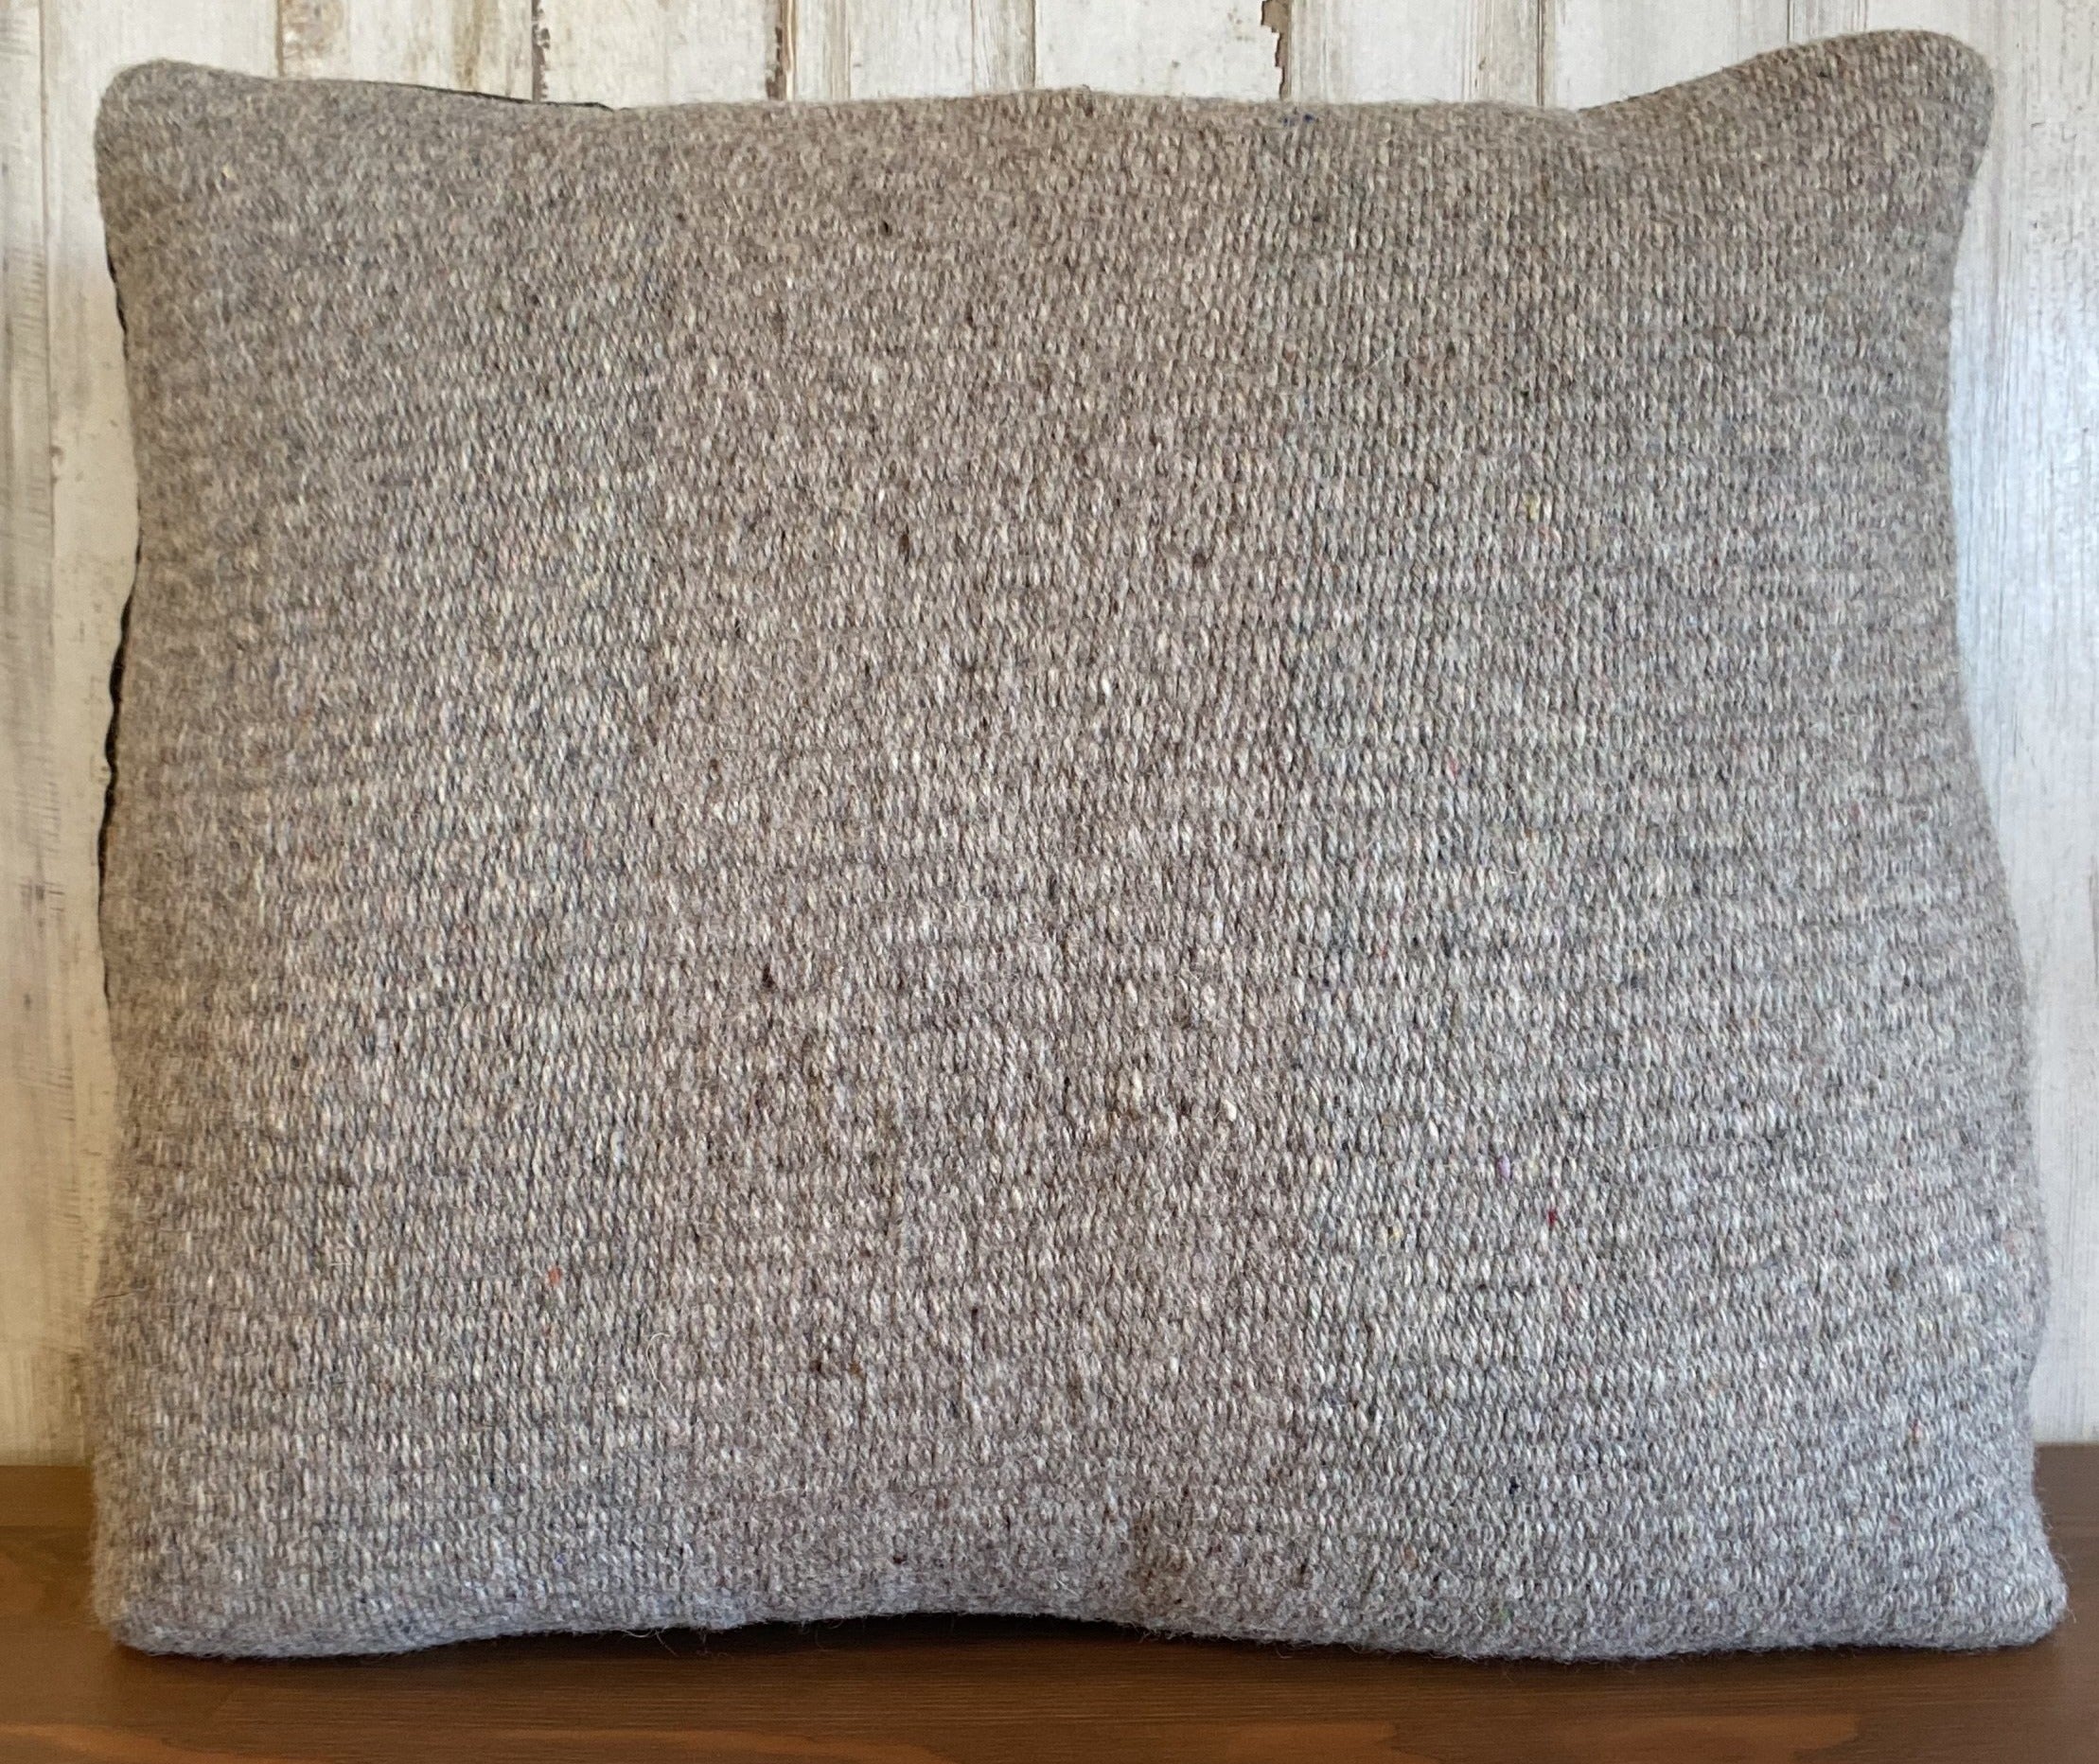 Handwoven Northern New Mexico Wool Pillow